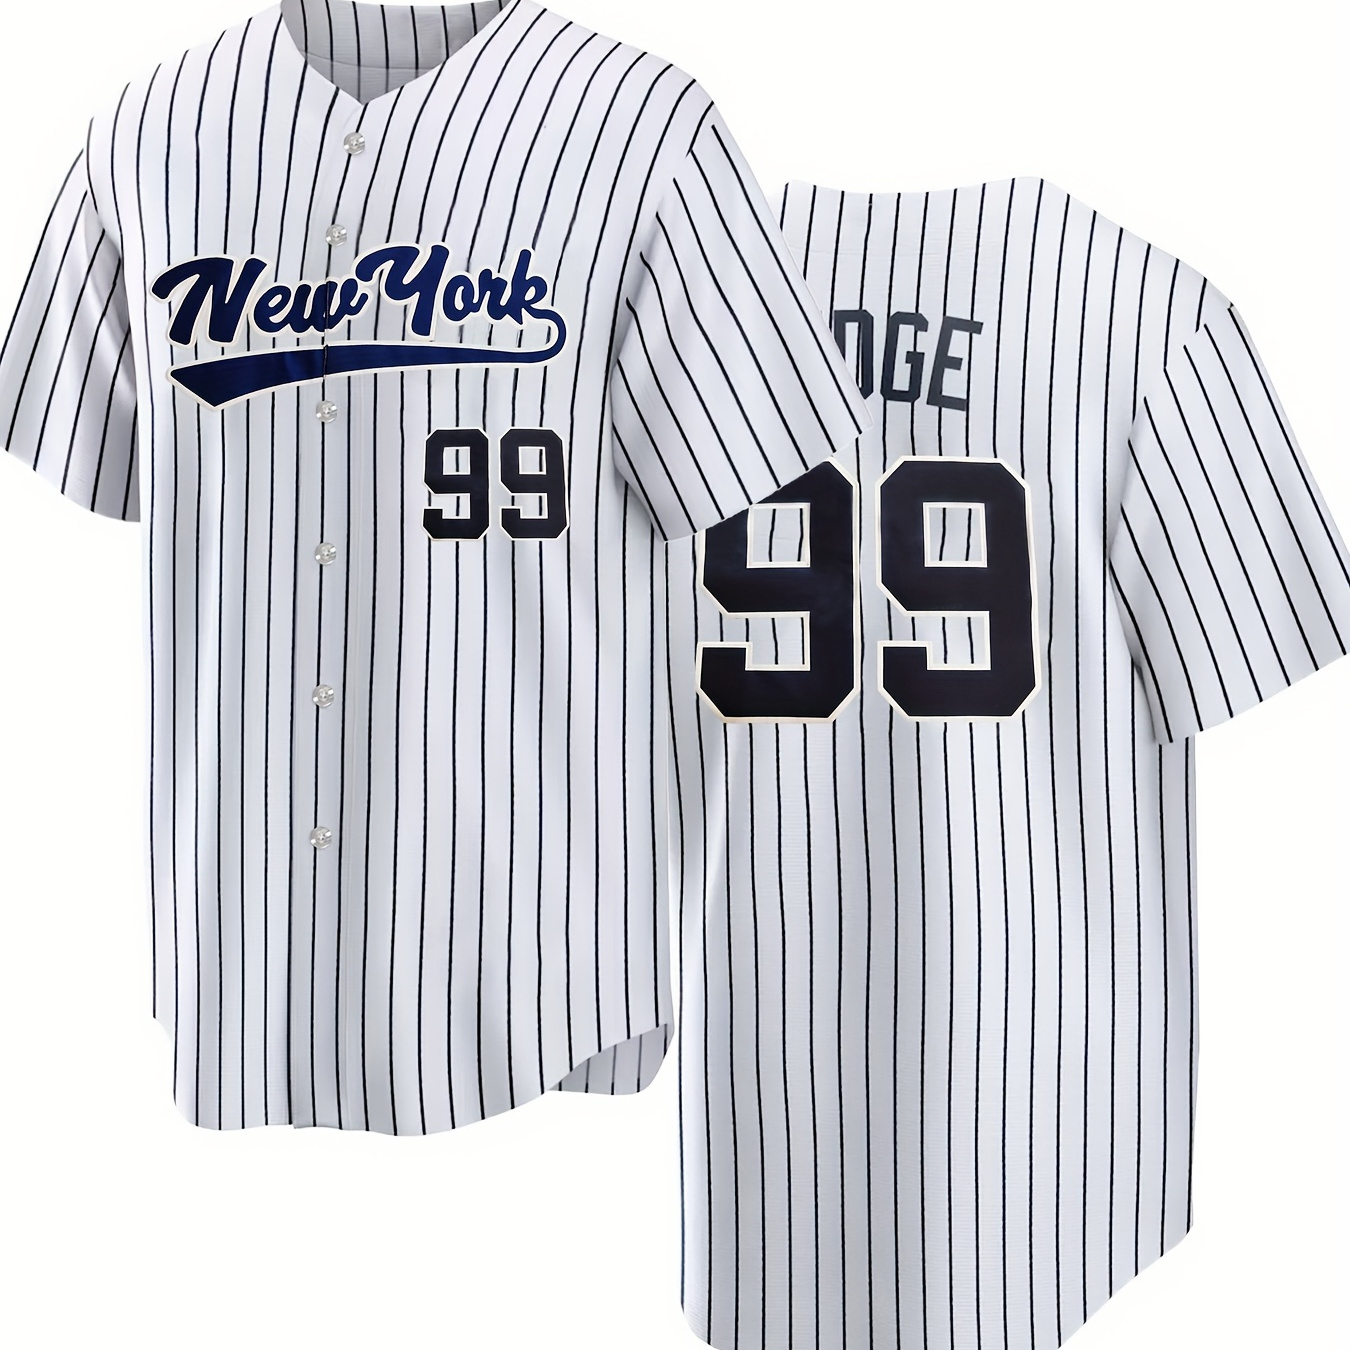 

Classic Letter & Number 99 Embroidered Design, Men's Striped Baseball Jersey, Short Sleeve Breathable Shirt For Training And Competition